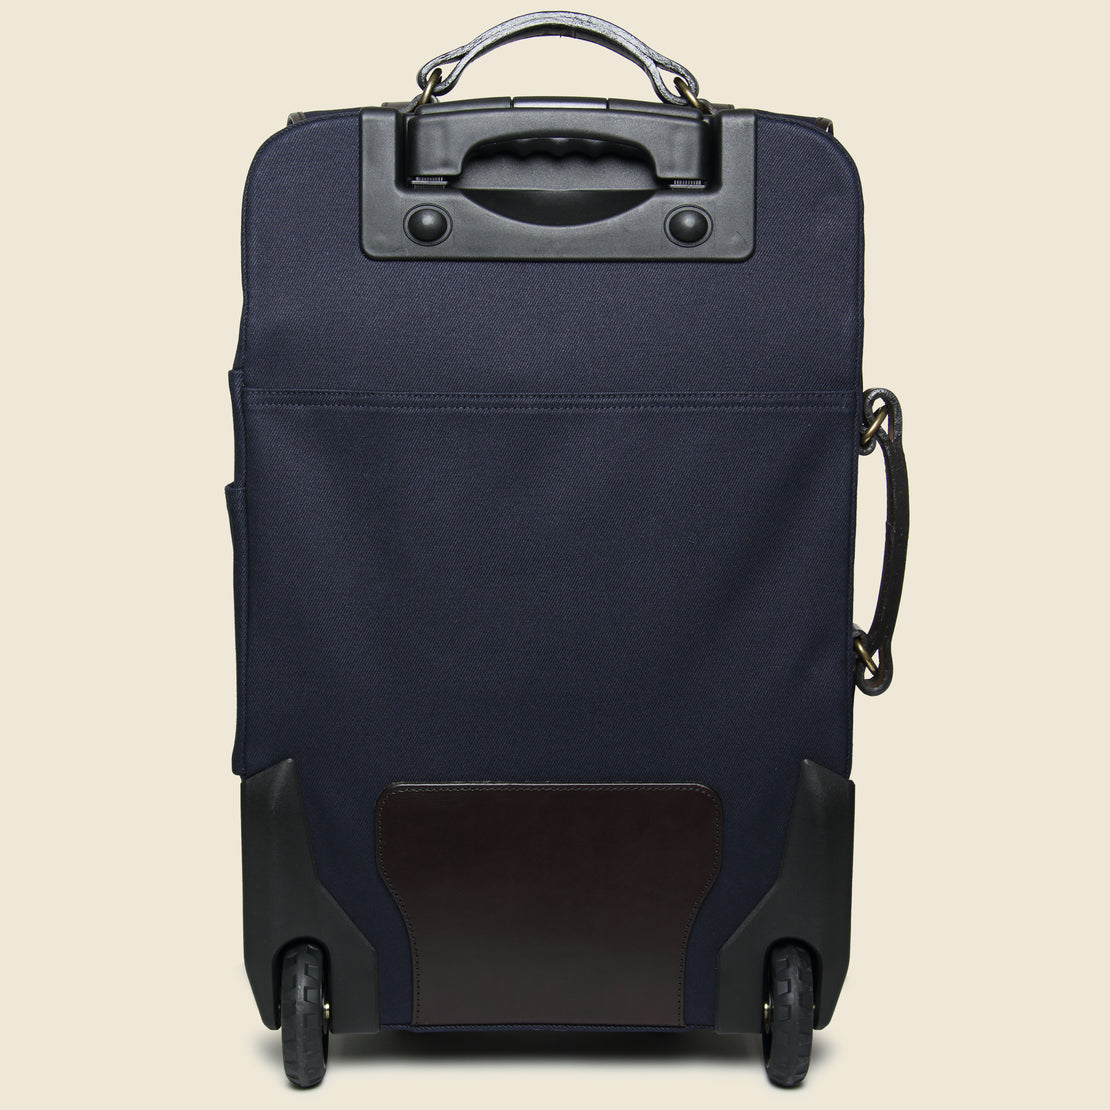 Rolling Carry-On Bag - Navy - Filson - STAG Provisions - Accessories - Bags / Luggage